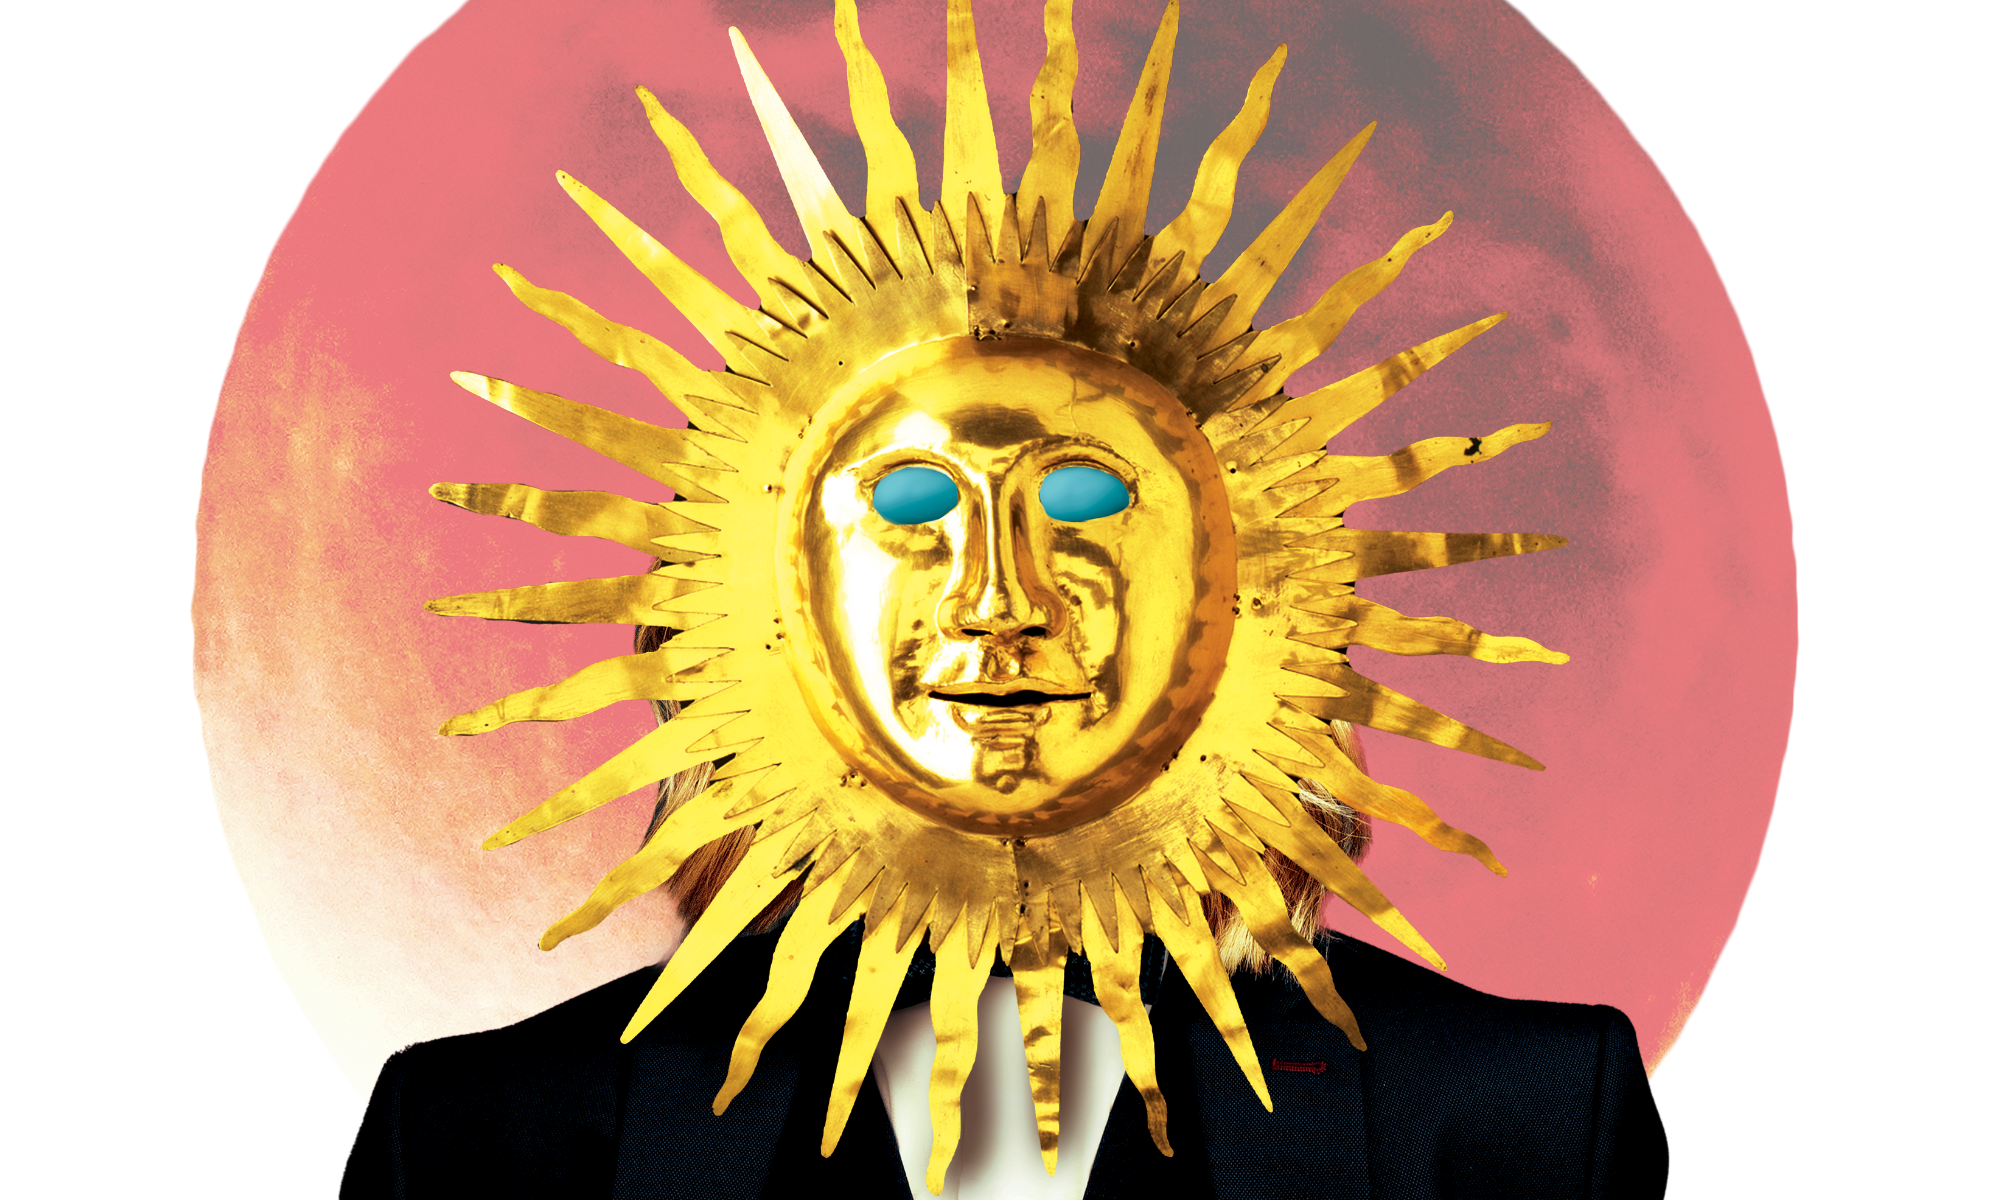 Person in a suite with a golden sun as their head